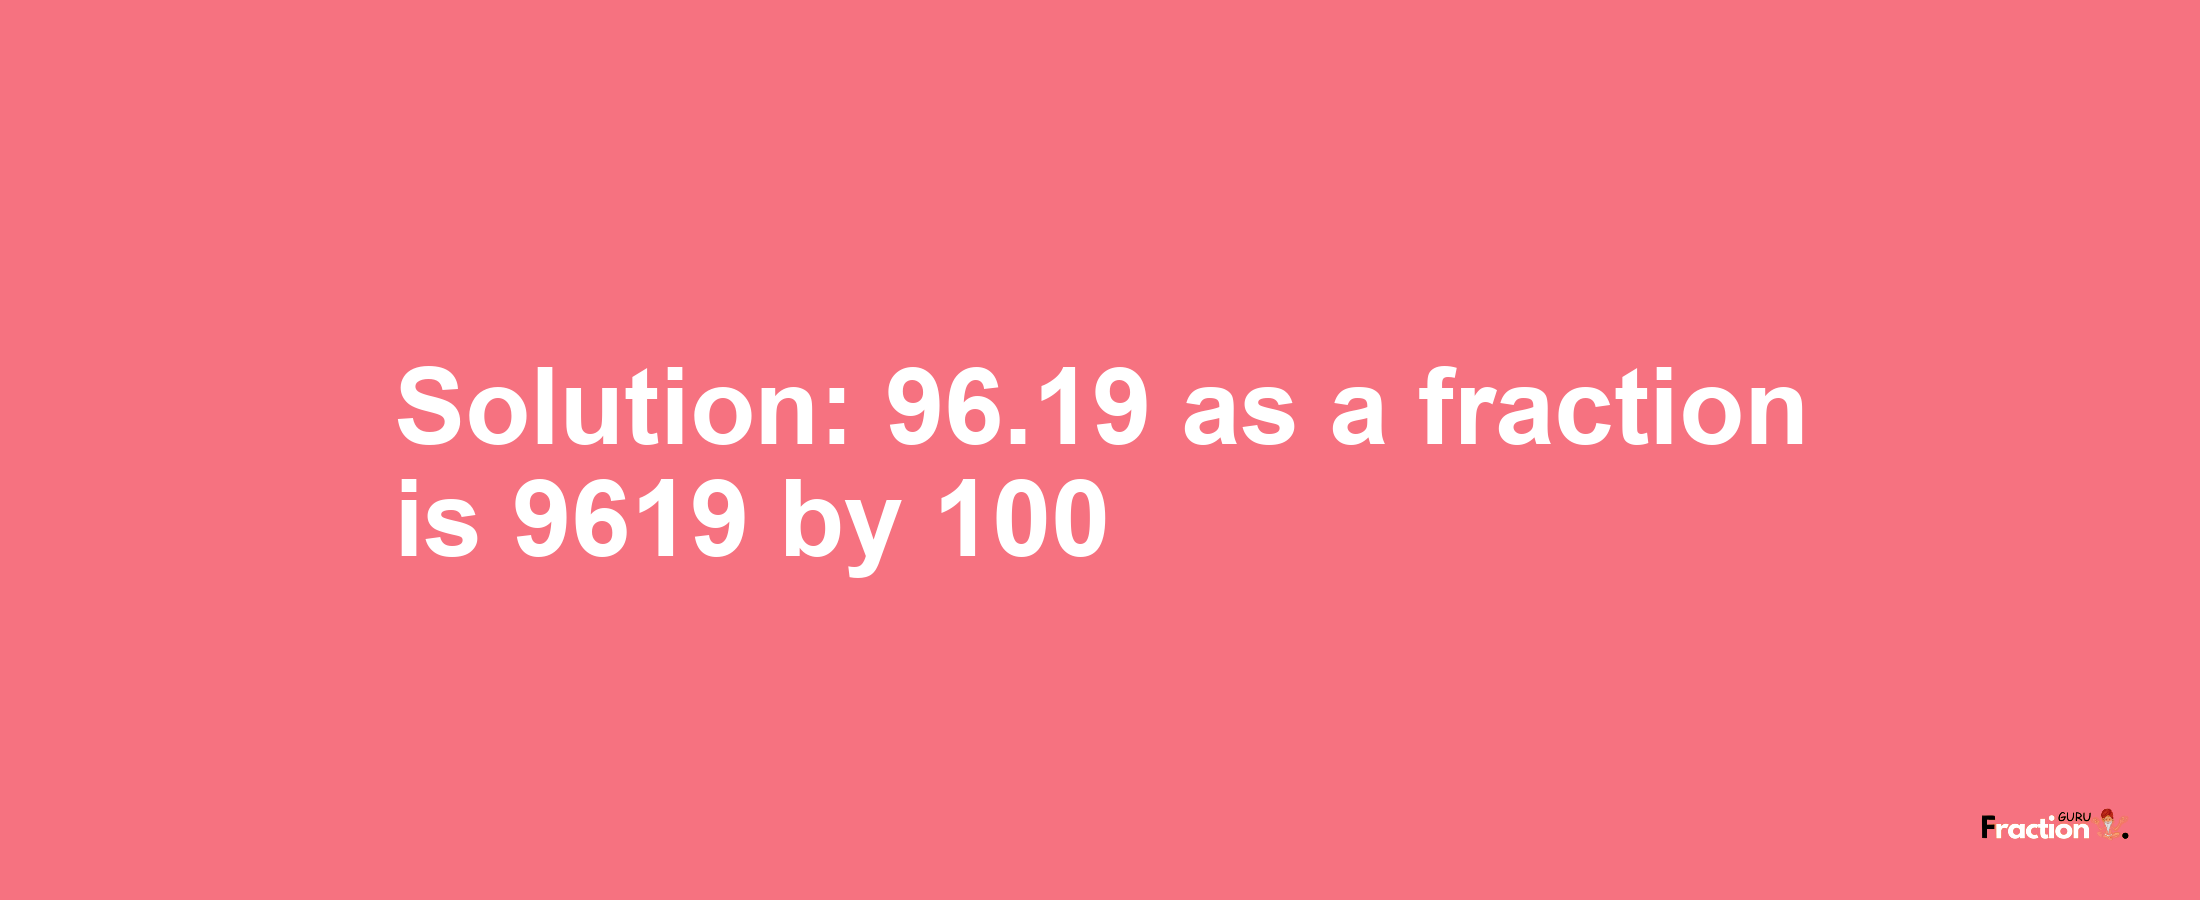 Solution:96.19 as a fraction is 9619/100